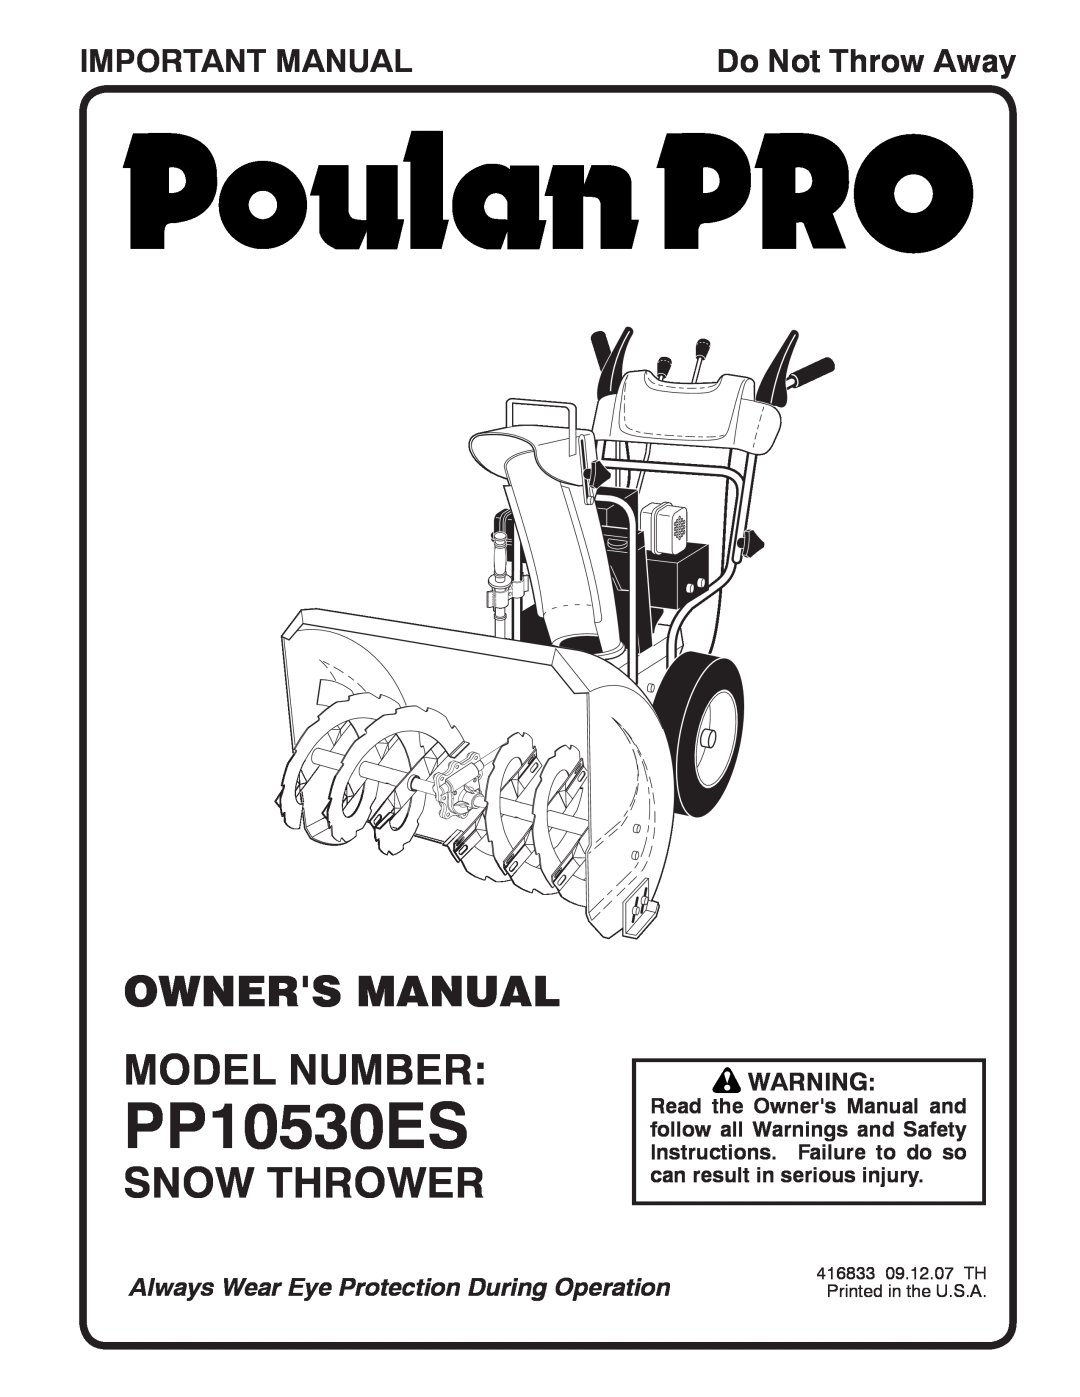 Poulan 416833 owner manual Owners Manual Model Number, Snow Thrower, Important Manual, PP10530ES, Do Not Throw Away 